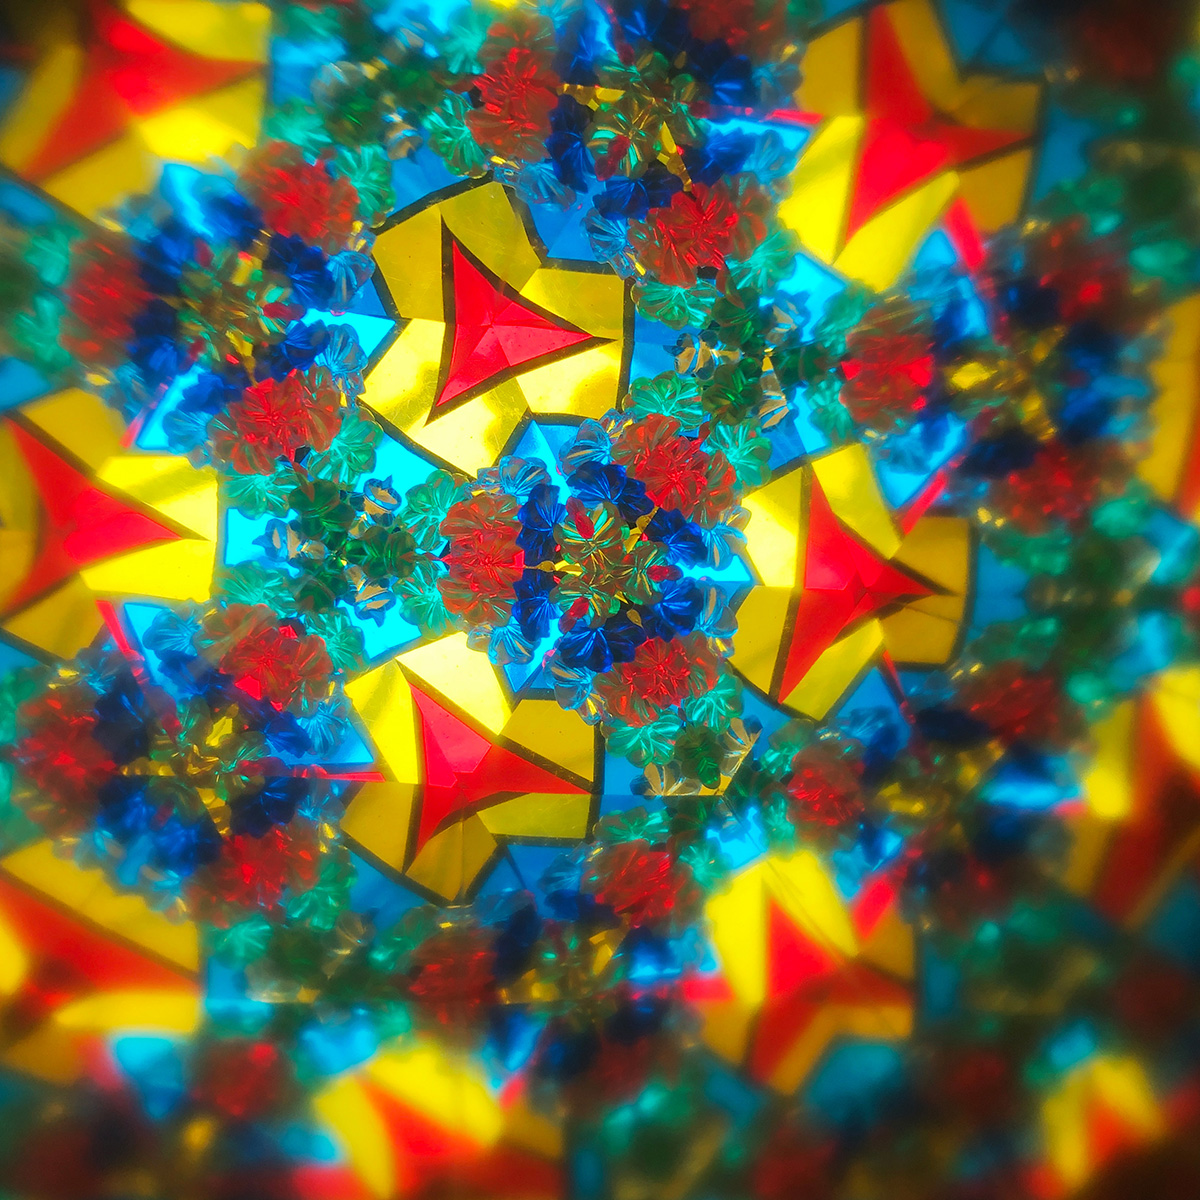 Picture taken within a kaleidoscope.